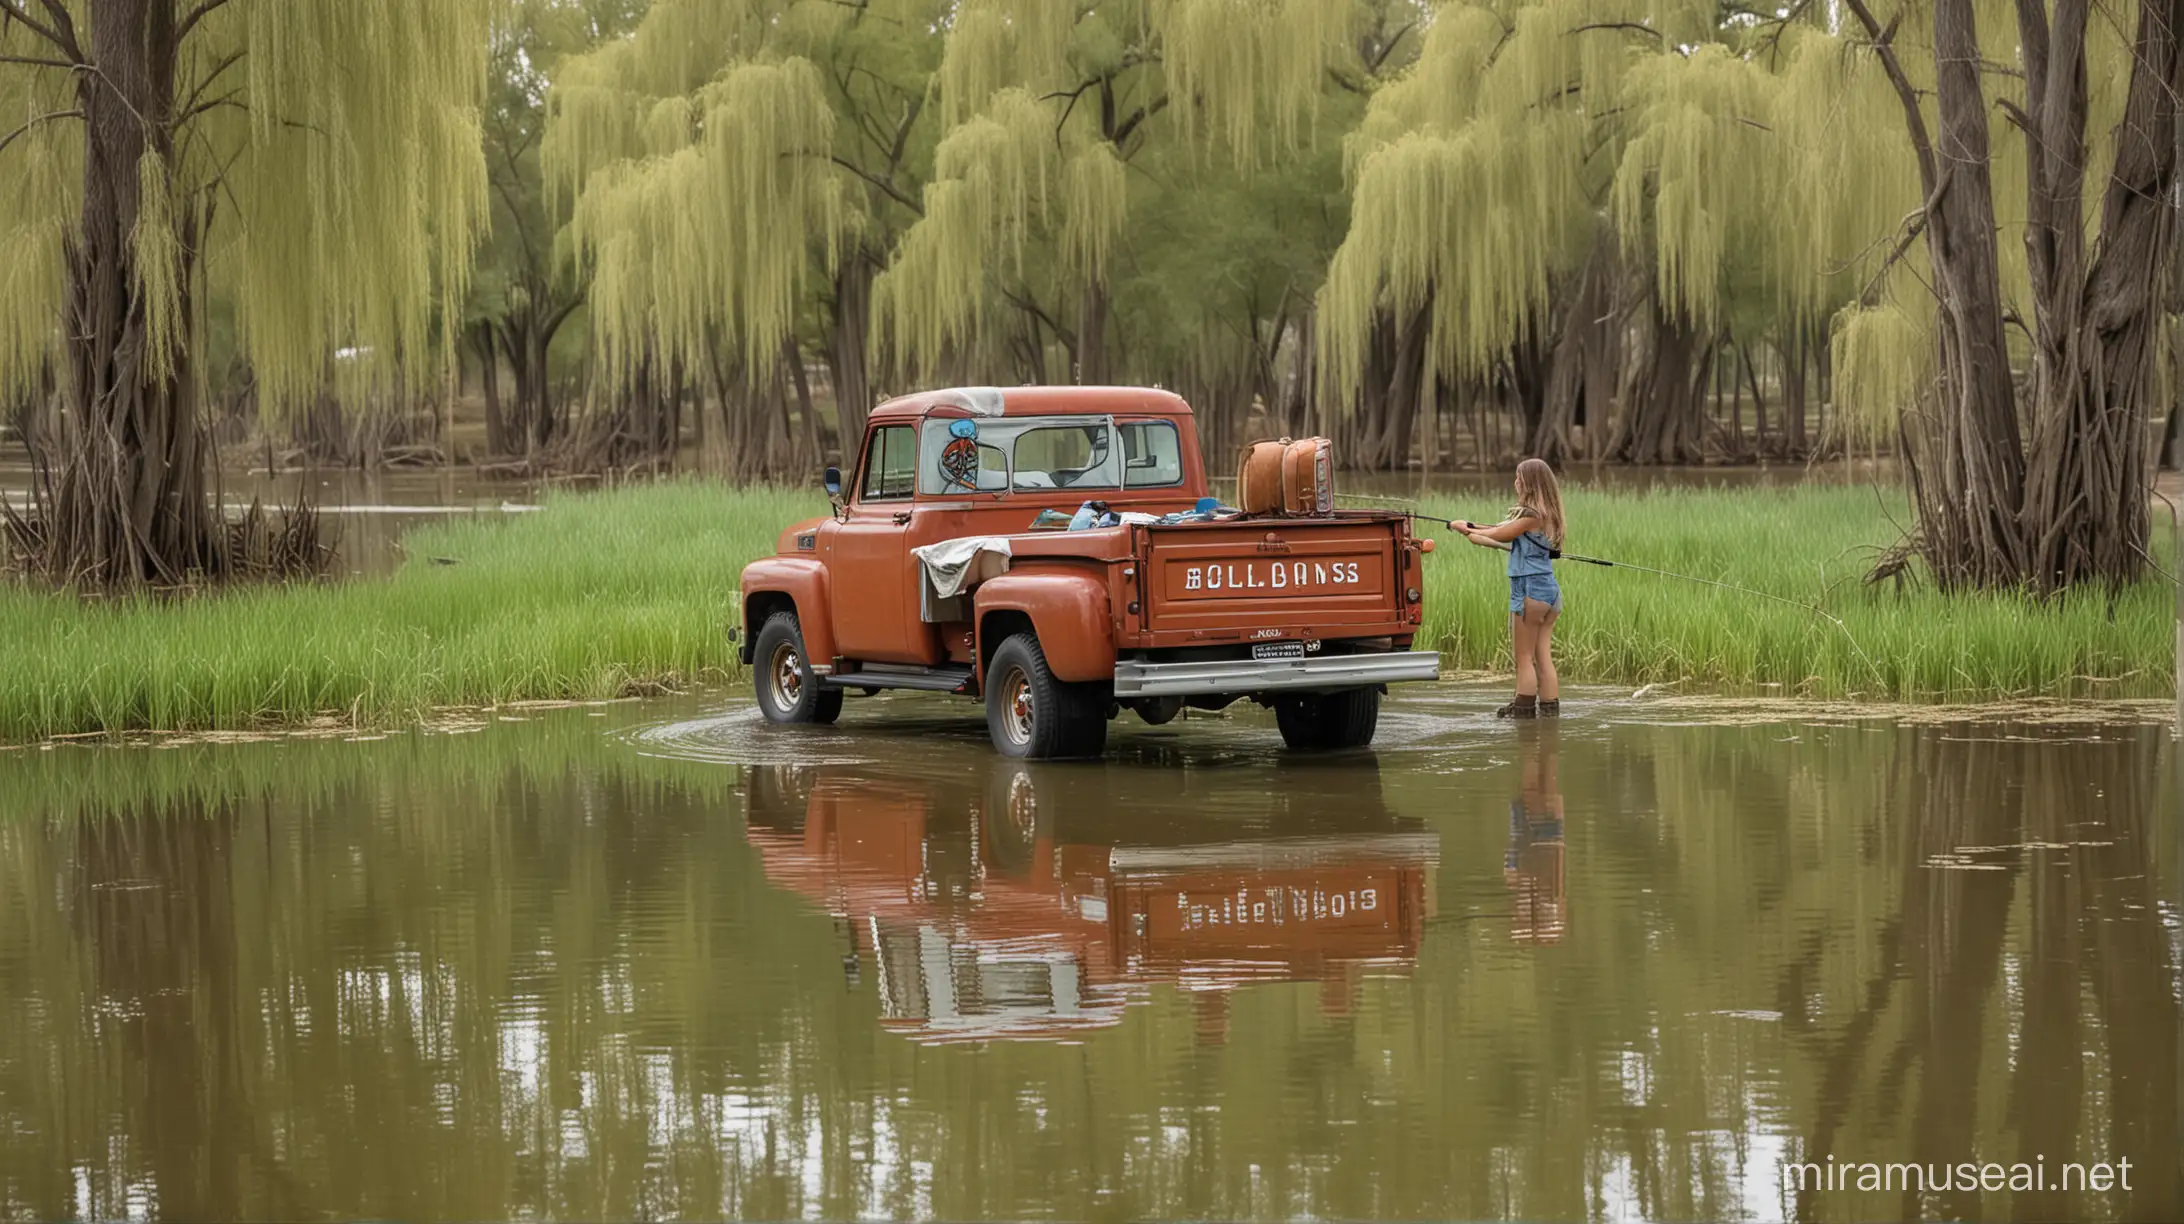 a beautiful girl fishing in a pond in southern indiana, there are weeping willow trees, and a c10 truck with bloodhounds in the back.